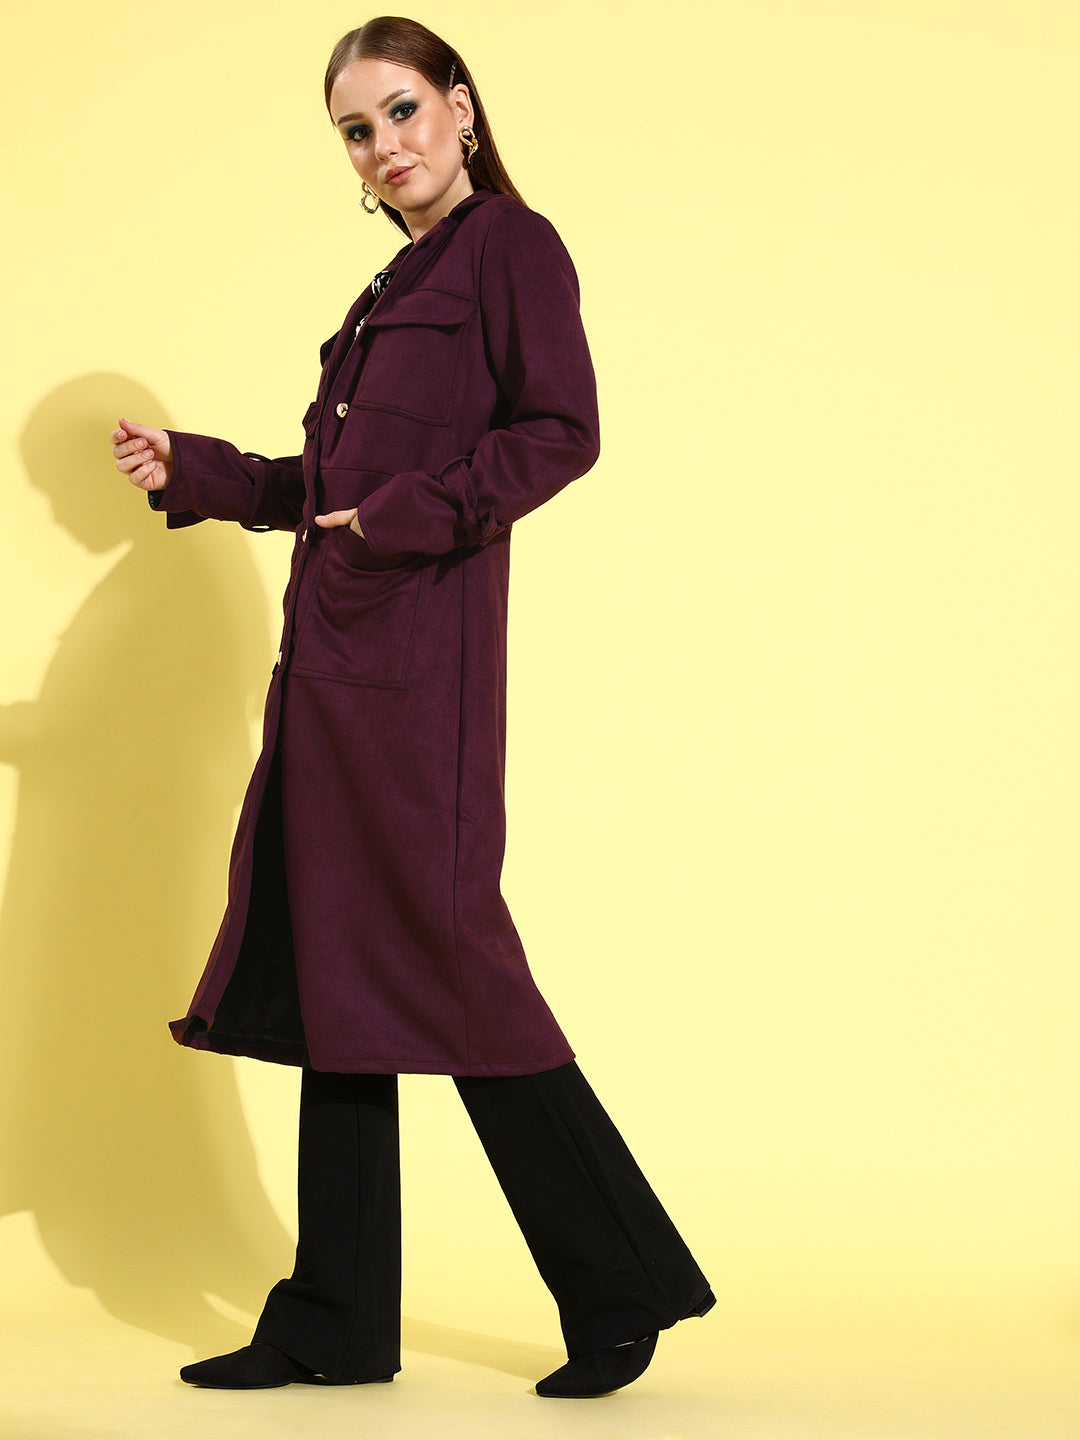 Athena Purple Suede trench coat with sleeve band and patch pocket details - Athena Lifestyle